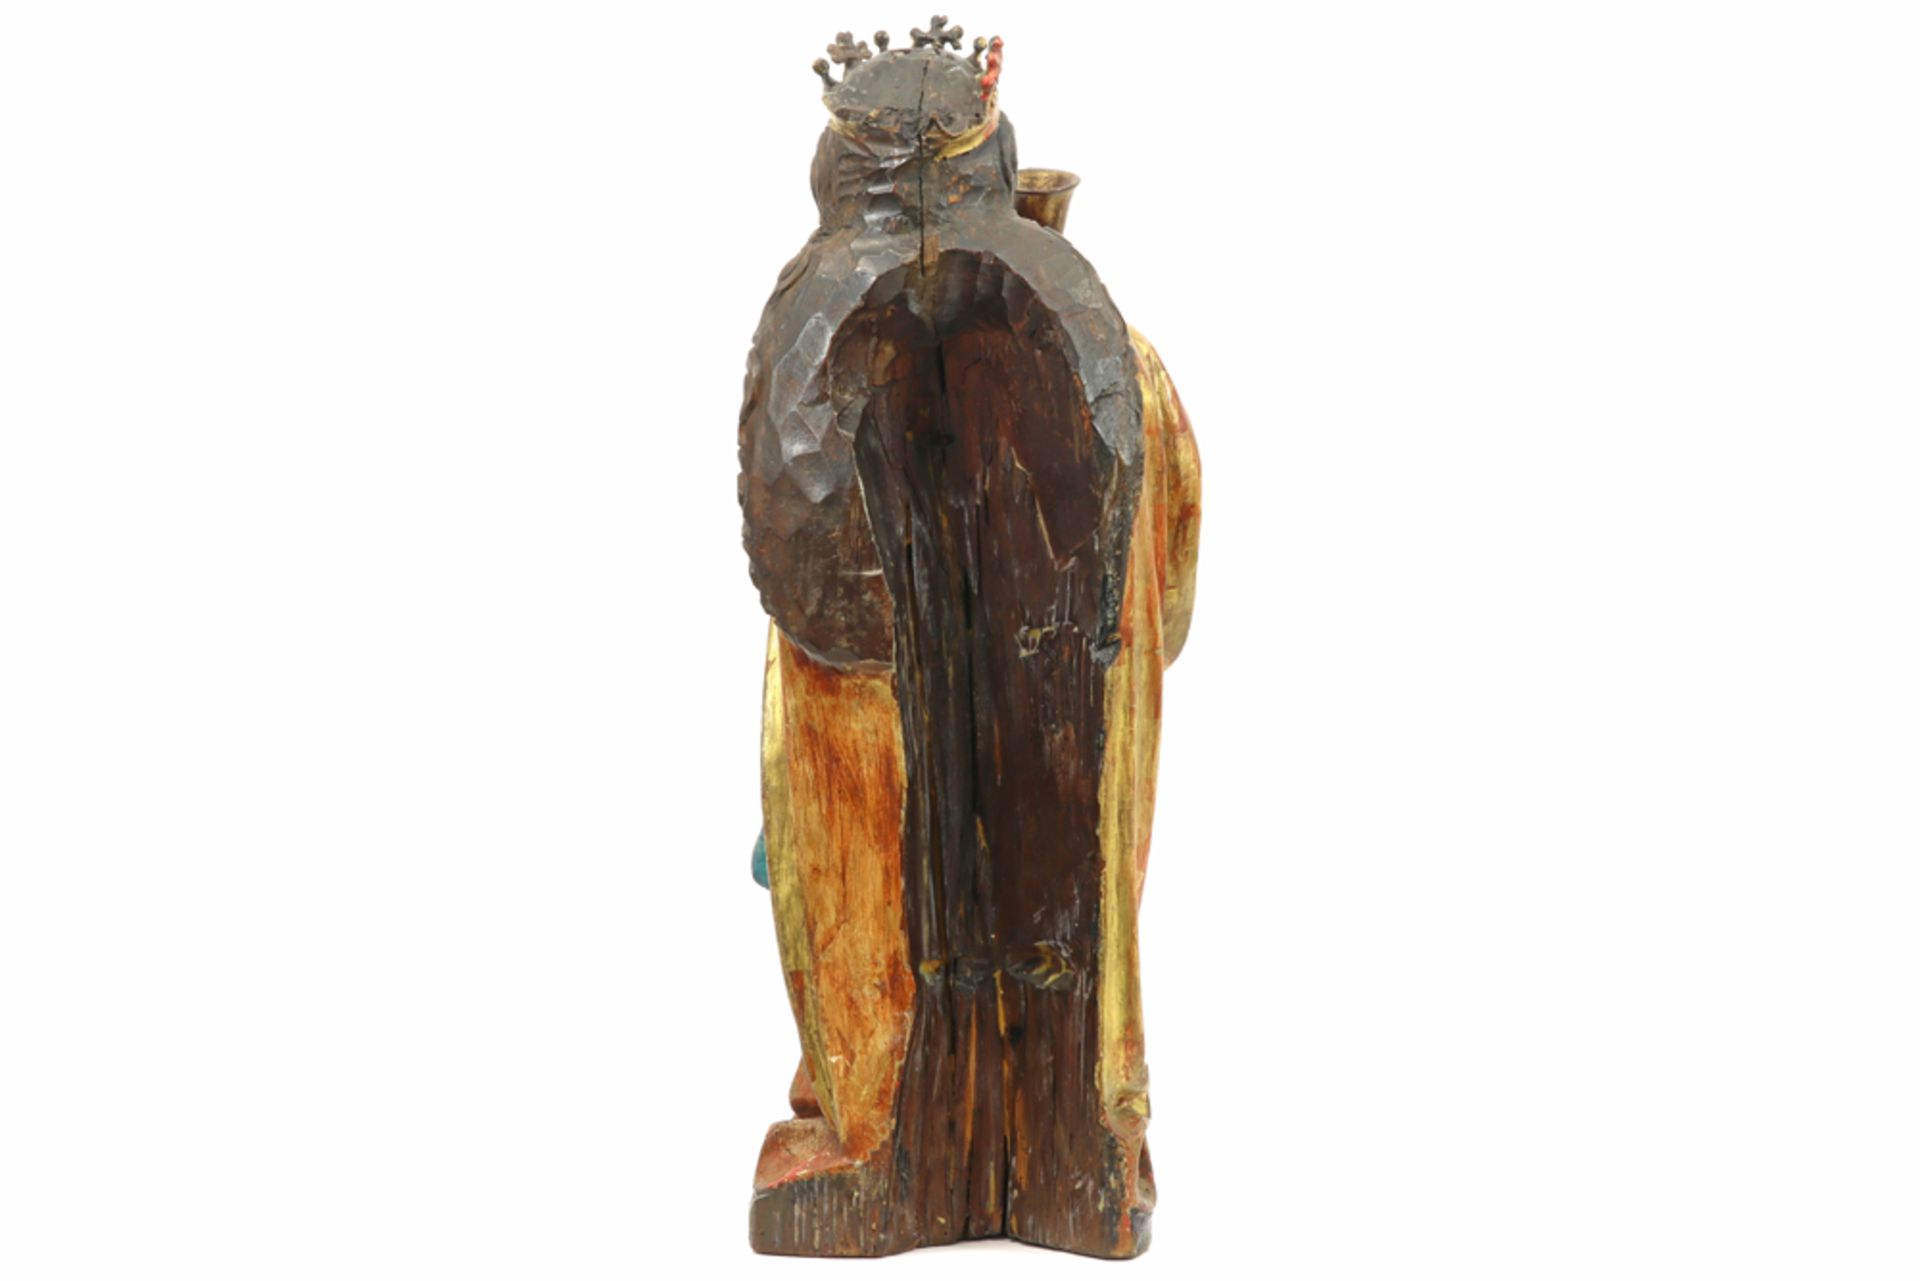 15th Cent. Flemish gothic style sculpture in wood with well preserved polychromy representing " - Bild 3 aus 5